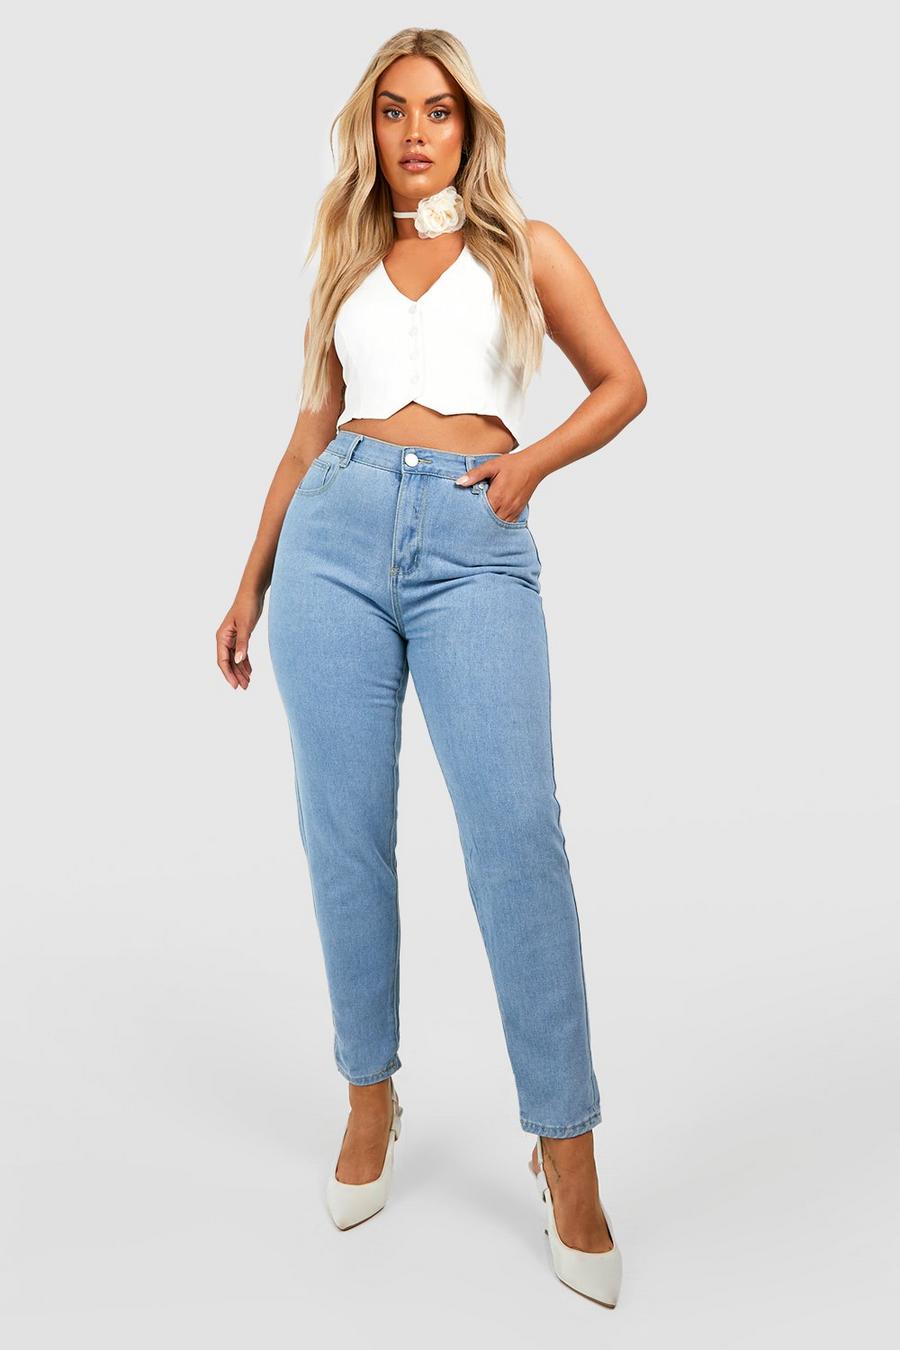 Jeans femme grande taille taille haute